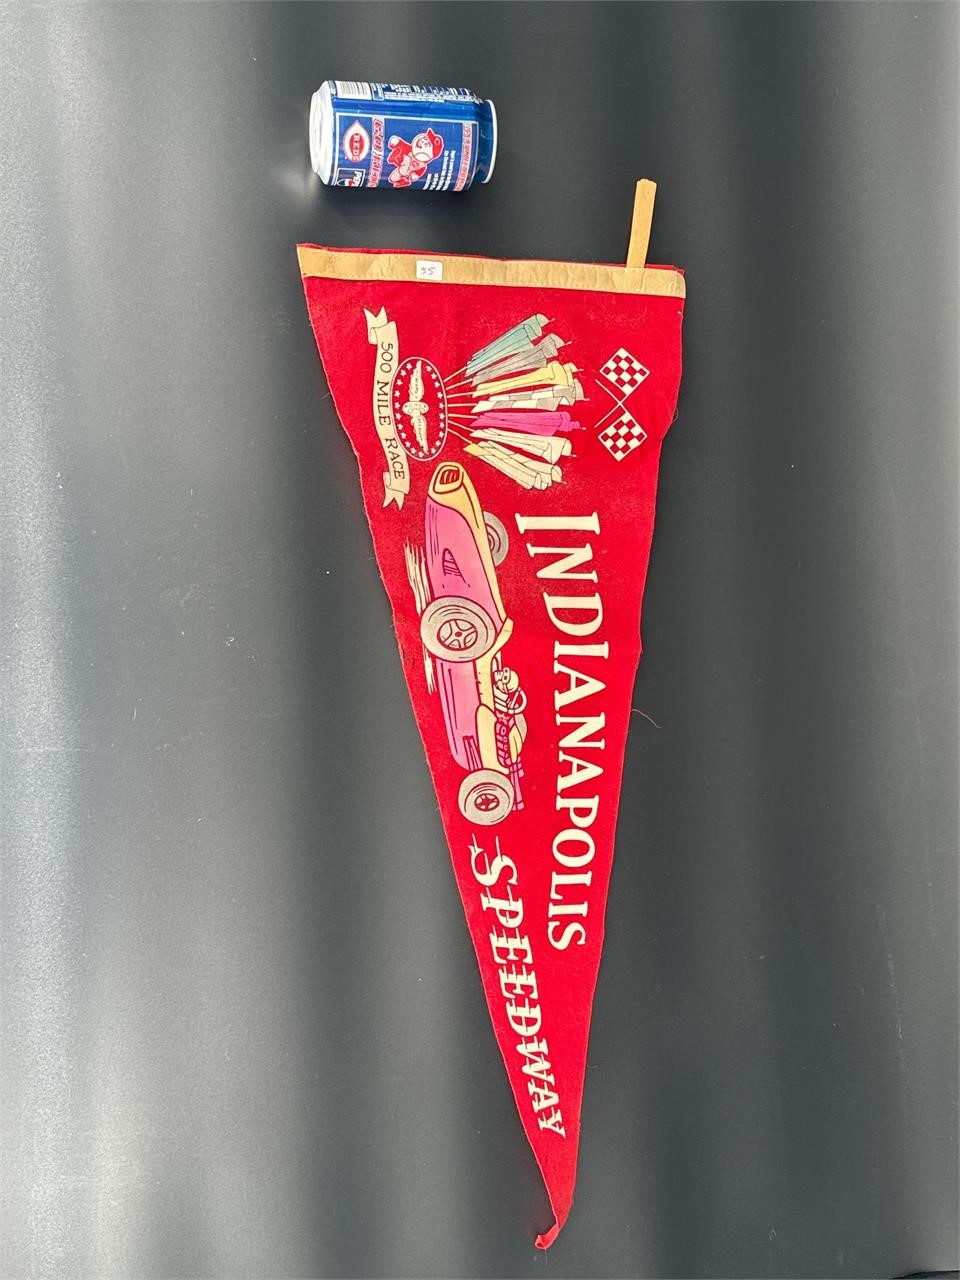 1970 INDIANAPOLIS SPEEDWAY INDY 500 FELT PENNANT